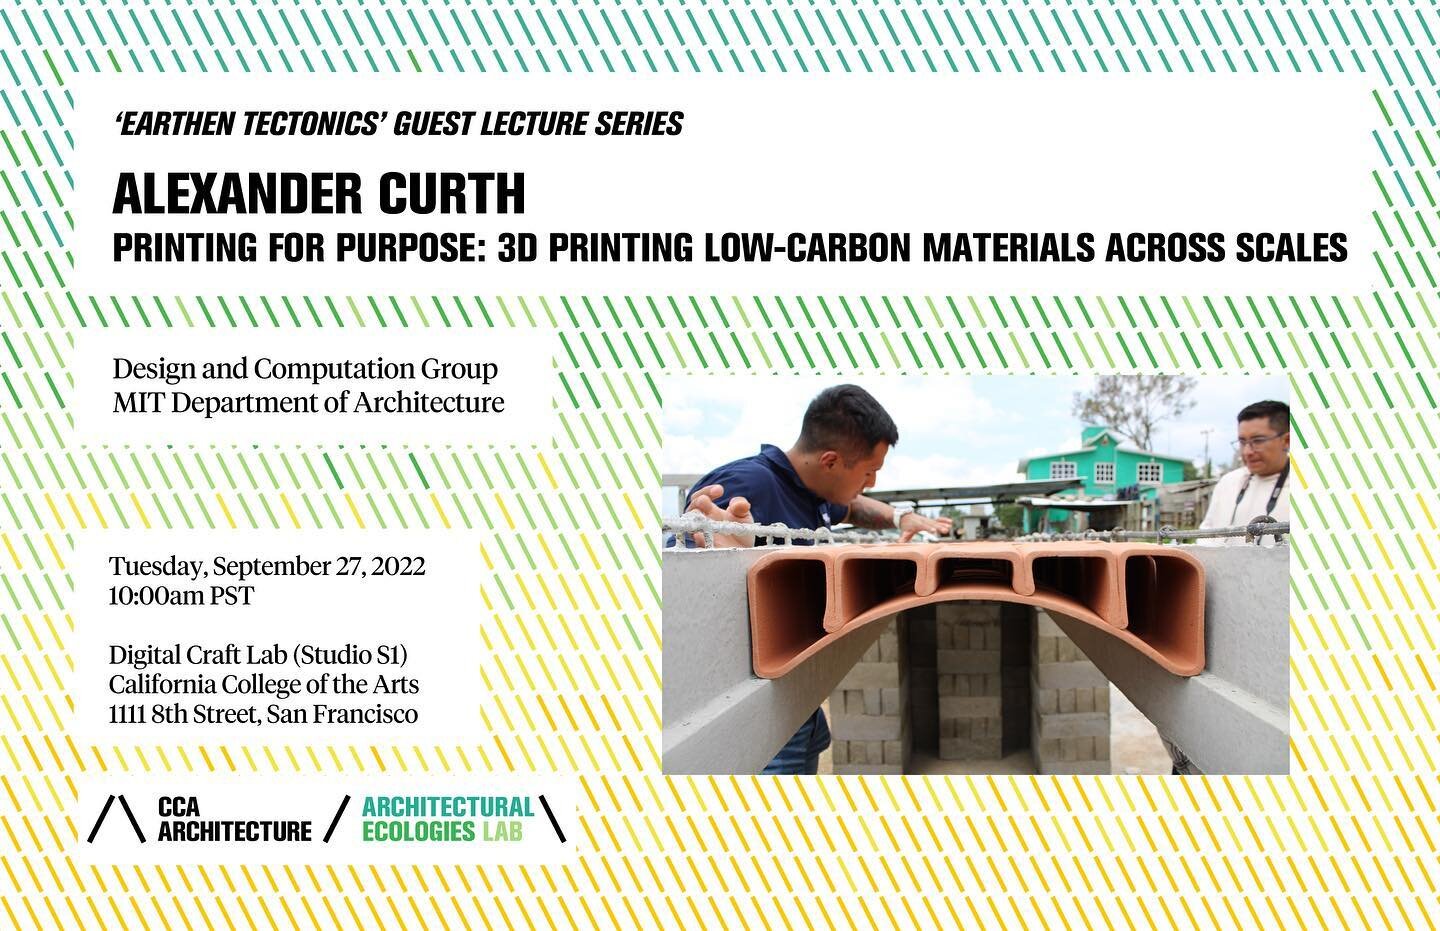 Tomorrow, Tuesday September 27: Join us for a talk by Sandy Curth @sandycurth of @mitarchitecture, who will present his research into 3d printing low carbon materials. The talk is organized as part of the fall 2022 Ecological Tectonics seminar led by